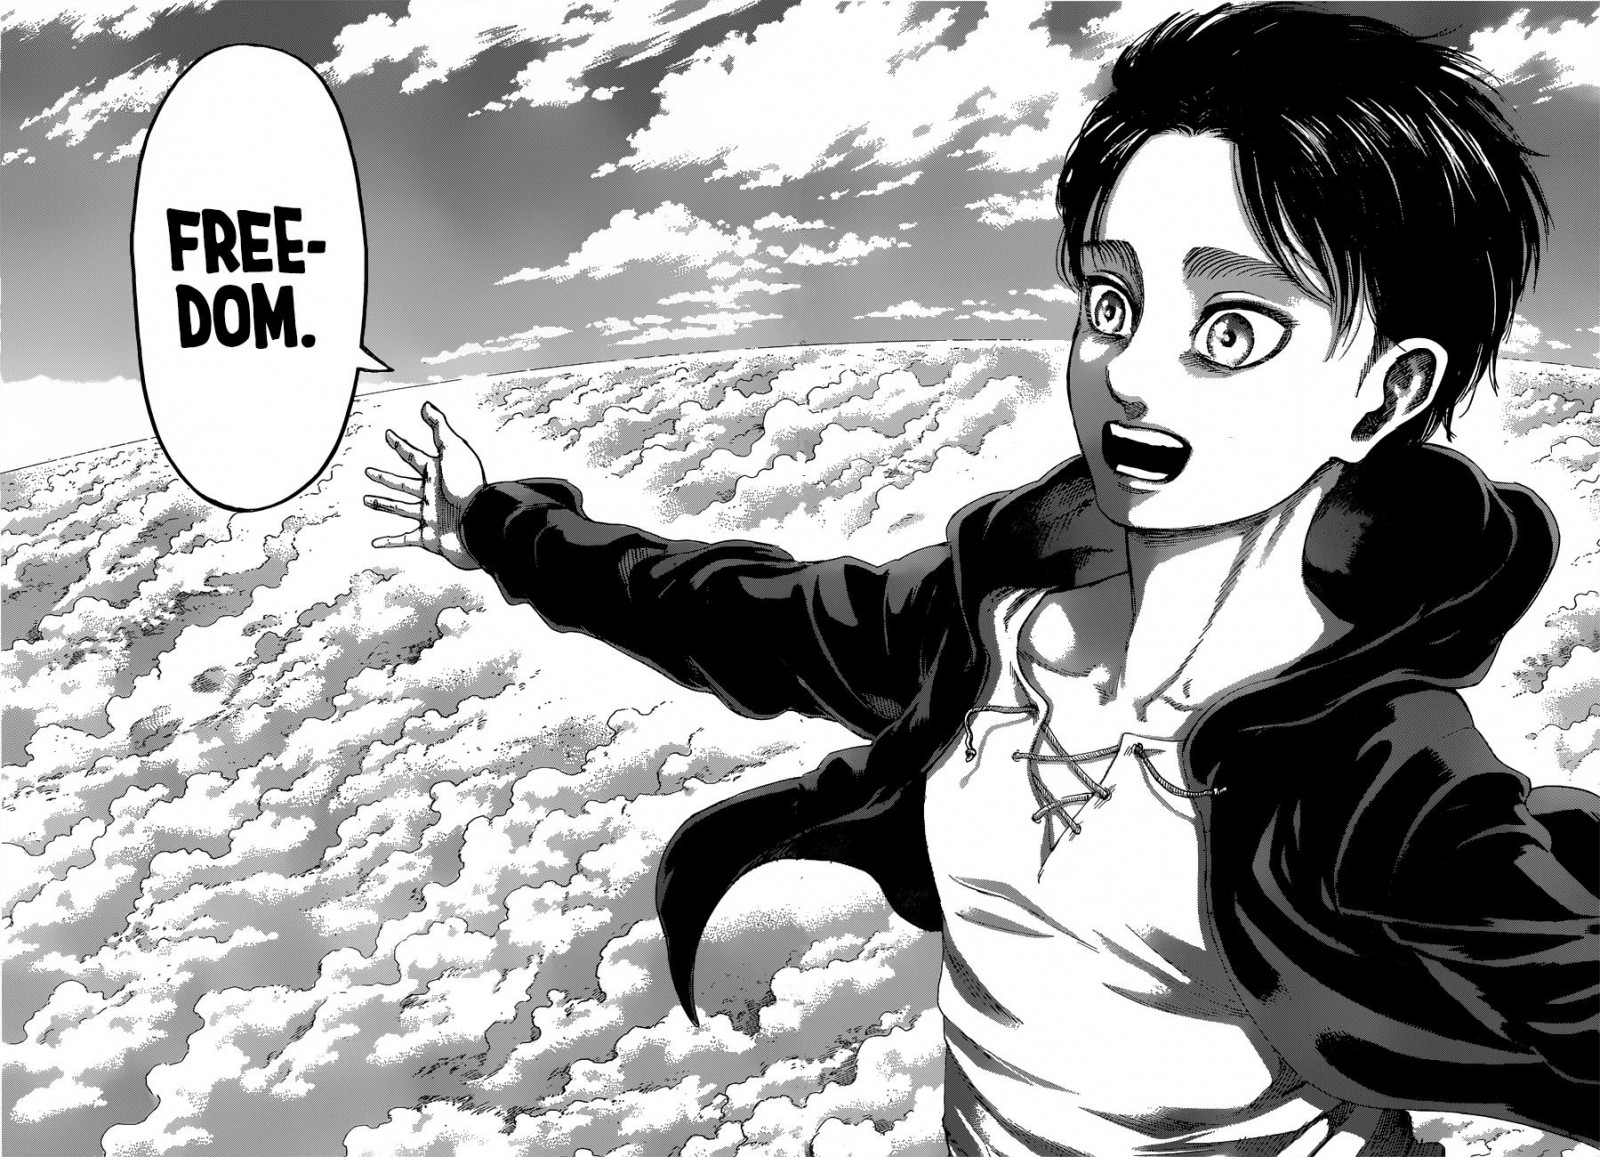 What Lies Beyond The Sea Shingeki No Kyojin Chapter 131 Review In Asian Spaces